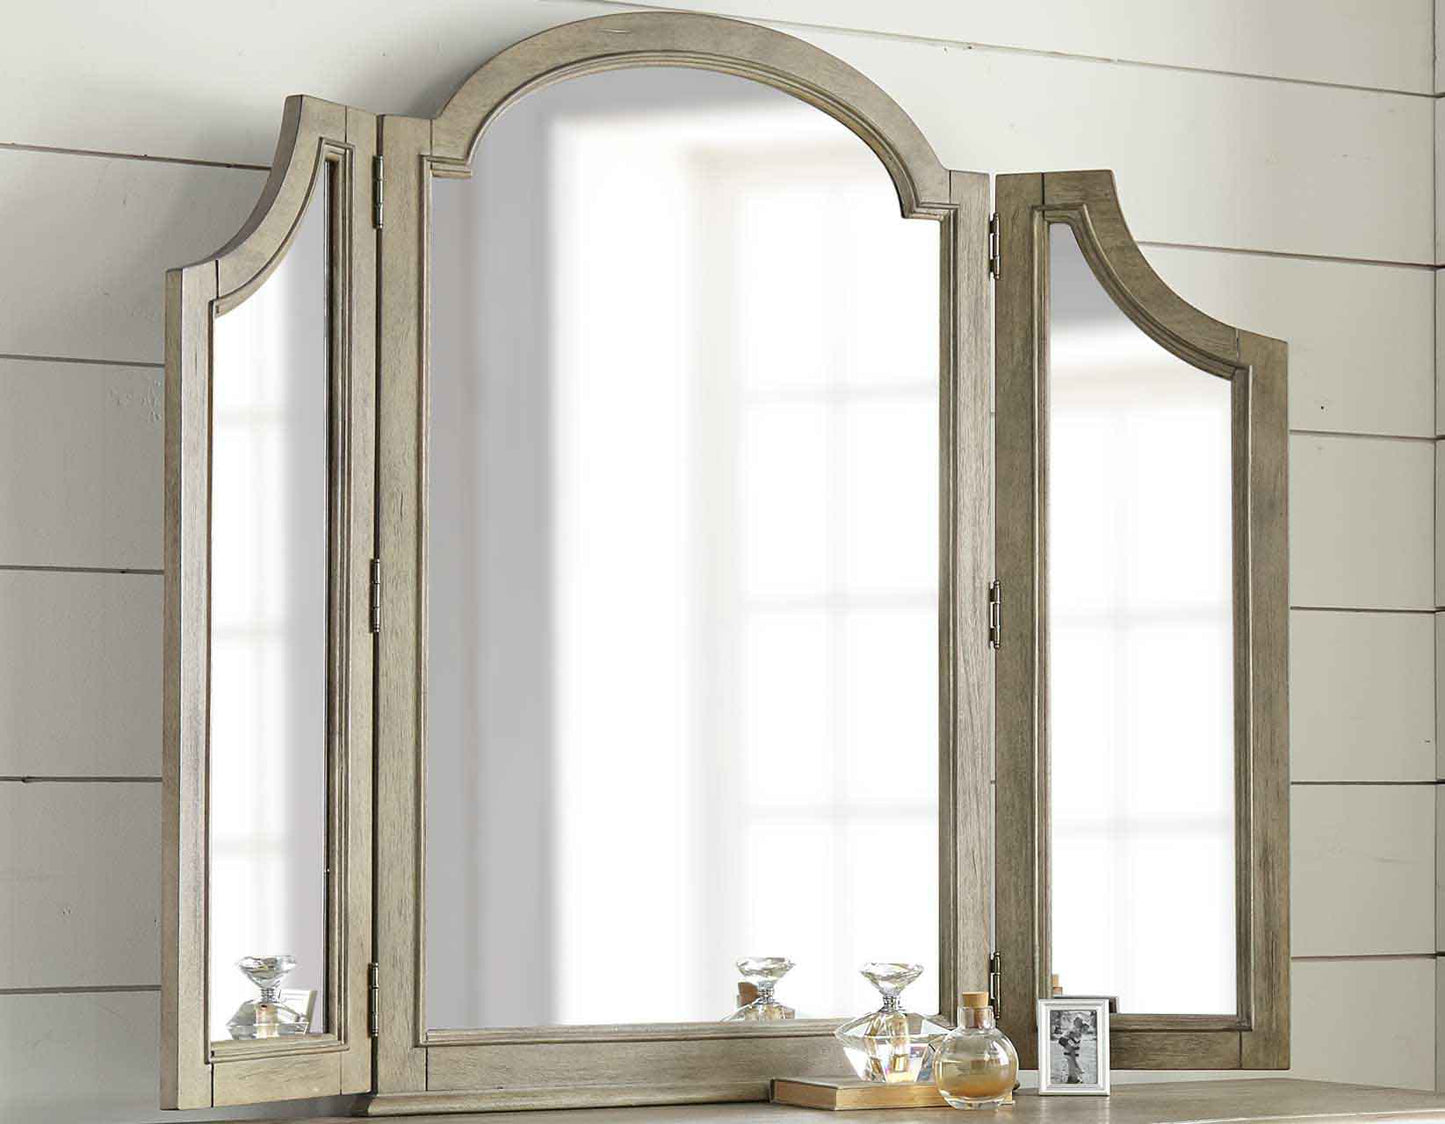 Highland Park Waxed Driftwood Vanity Mirror by Steve Silver